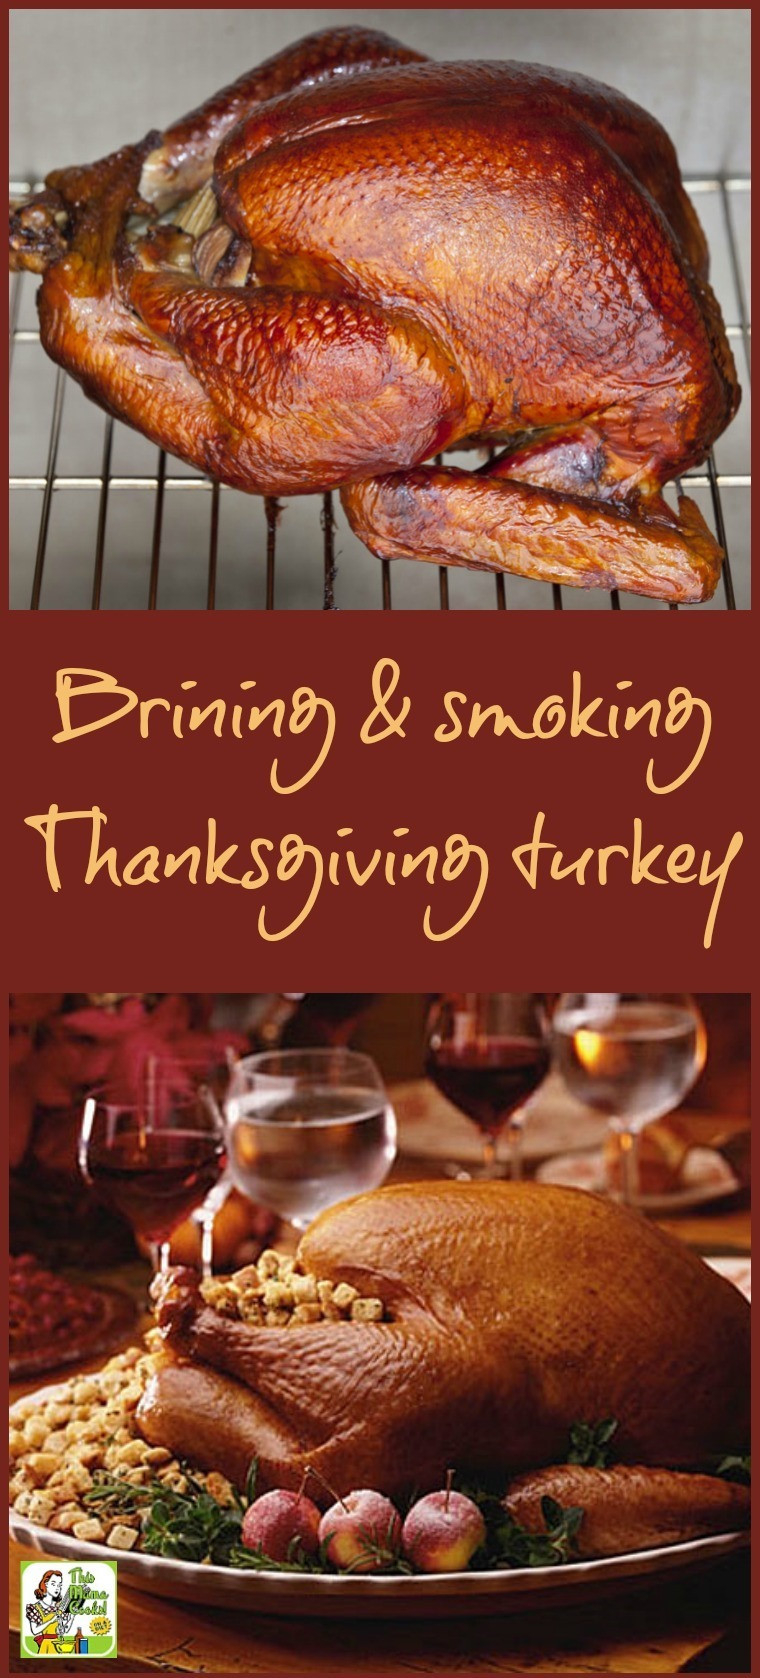 Smoke A Turkey For Thanksgiving
 Brining and smoking your Thanksgiving turkey